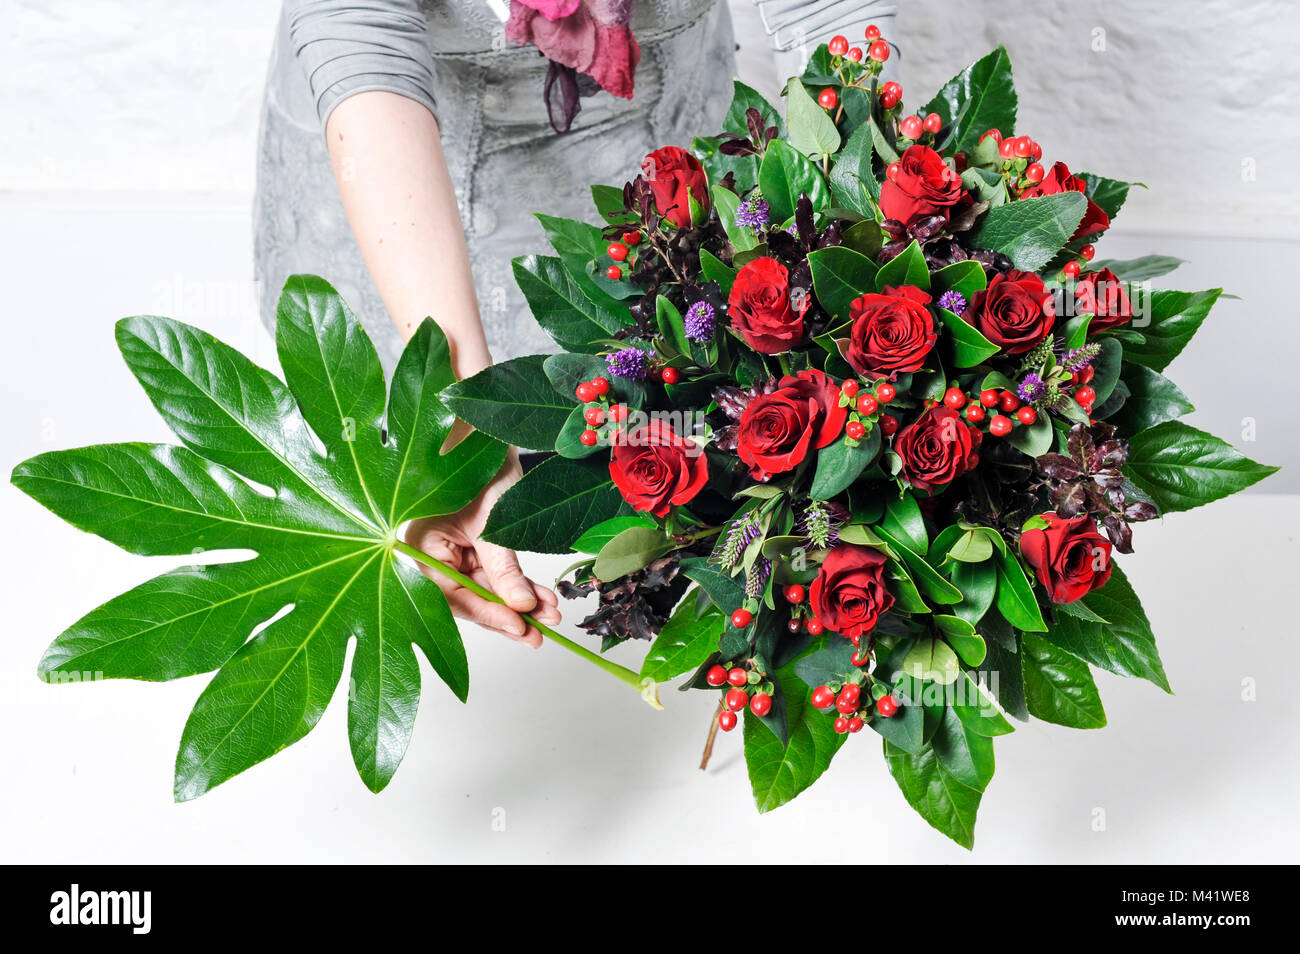 Woman showing how to arrange flowers from cutting to tying them together. Stock Photo